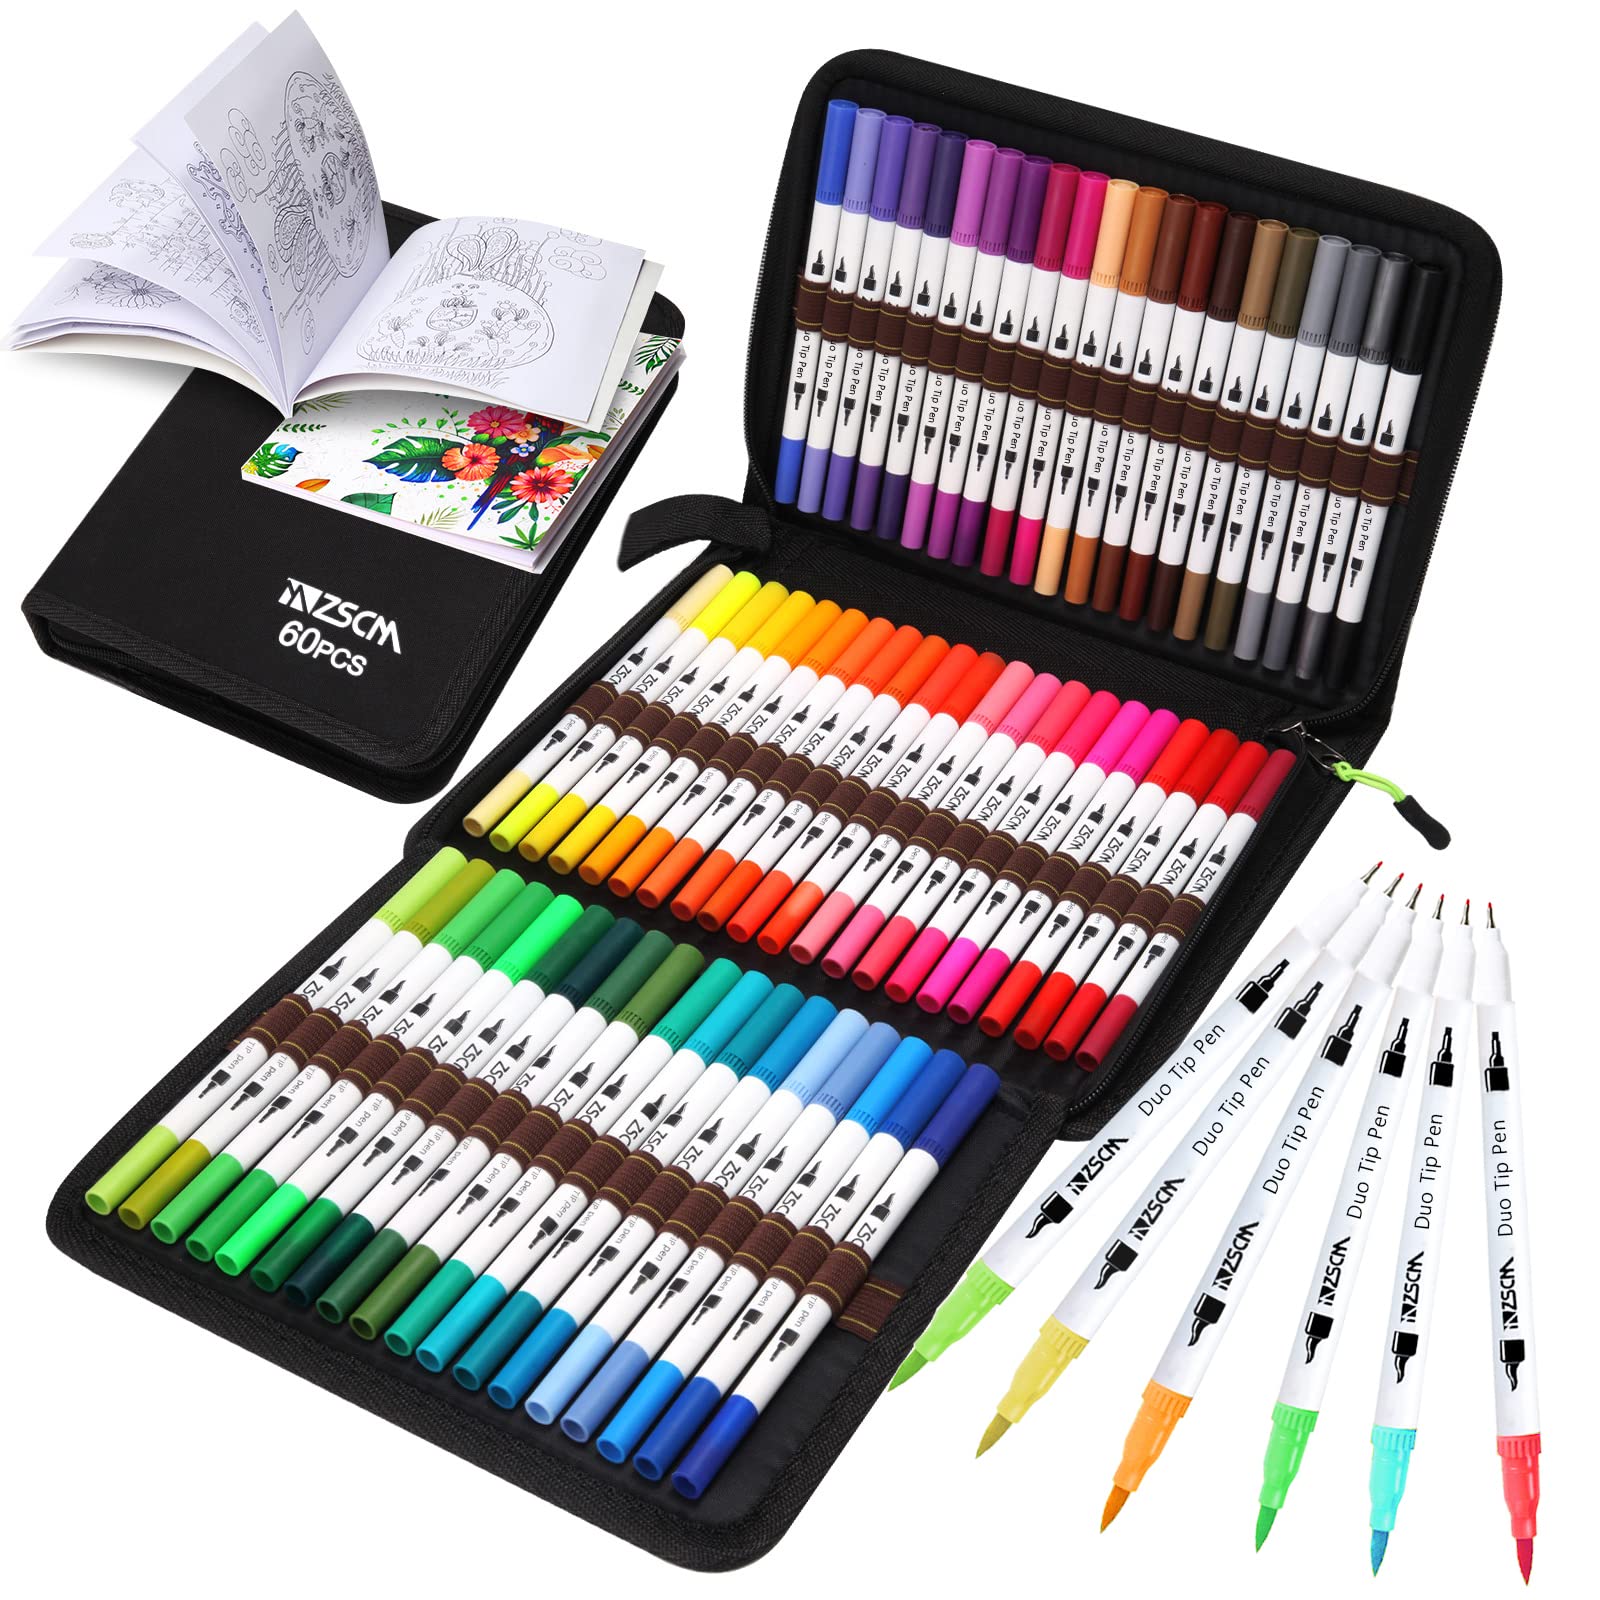 Art Coloring Brush Markers,ZSCM 25 Colors Duo Tip Calligraphy Marker Journal Pens for Adult Coloring Books Drawing Bullet Journal Planner Calendar